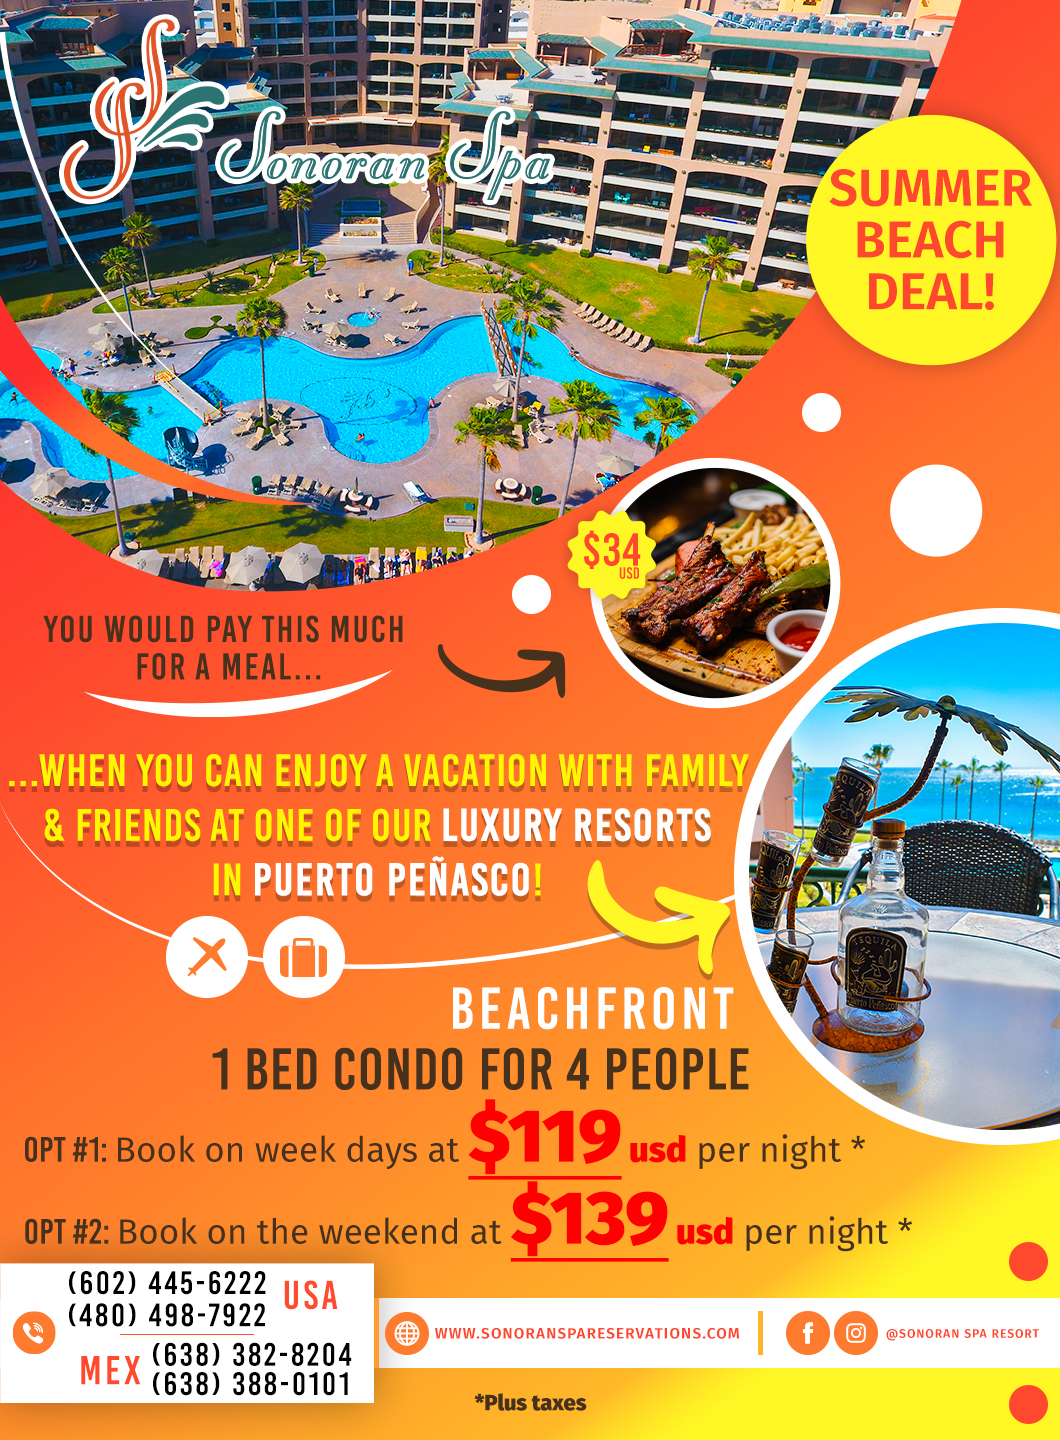 Sononra spa Rocky Point Reservations Promotions Vacations